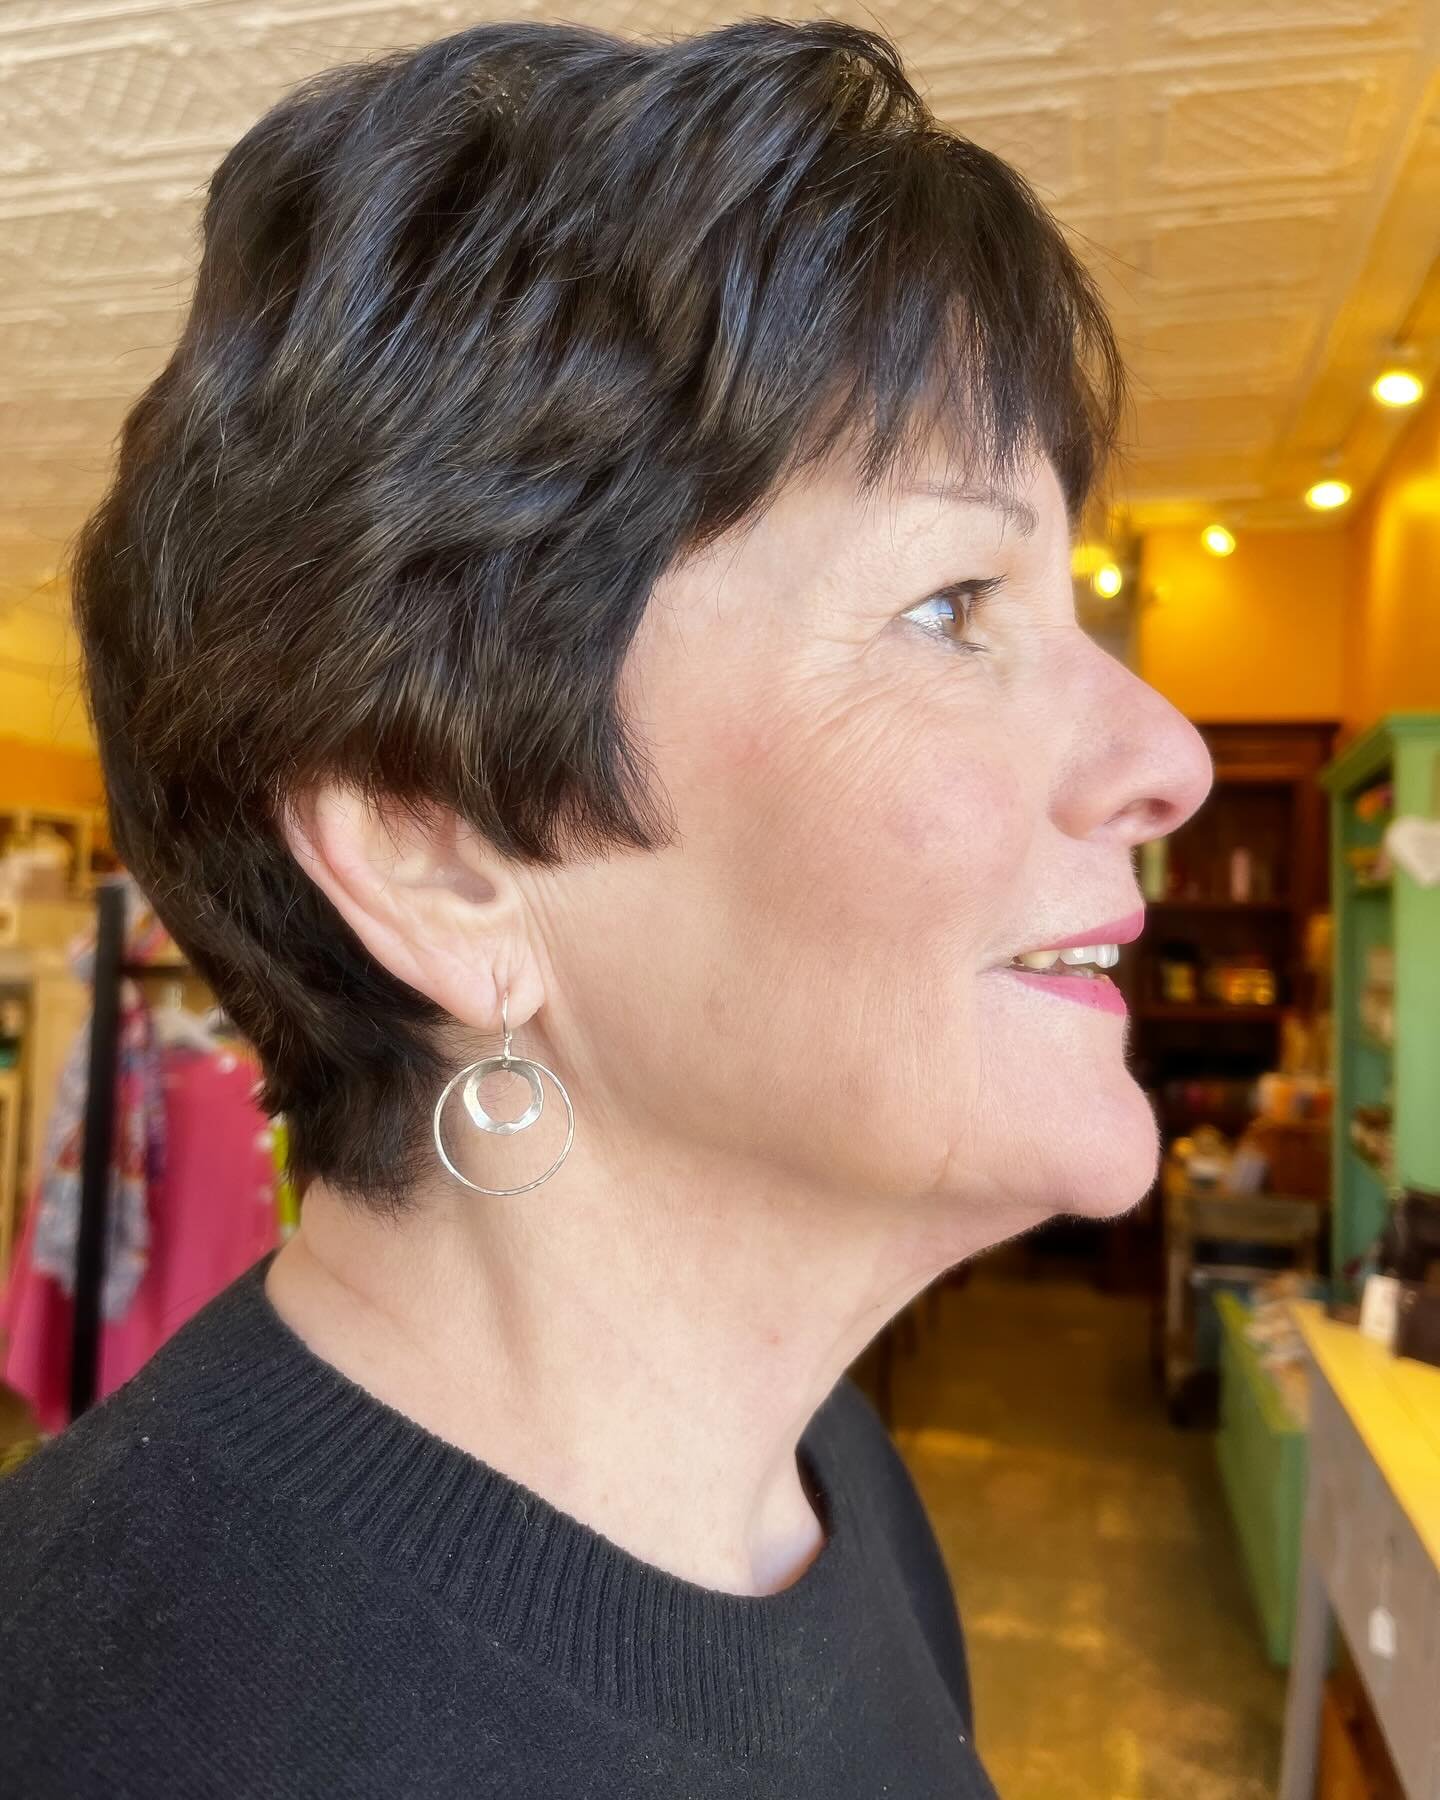 Tonight! Come down to meet local jeweler @lisaheffleyjewelry and purchase stunning handcrafted pendants, rings and earrings directly from her. Plus, a huge shipment of garden stakes, birdhouses, and birdbaths arrived today! The event is 4-7 pm today,